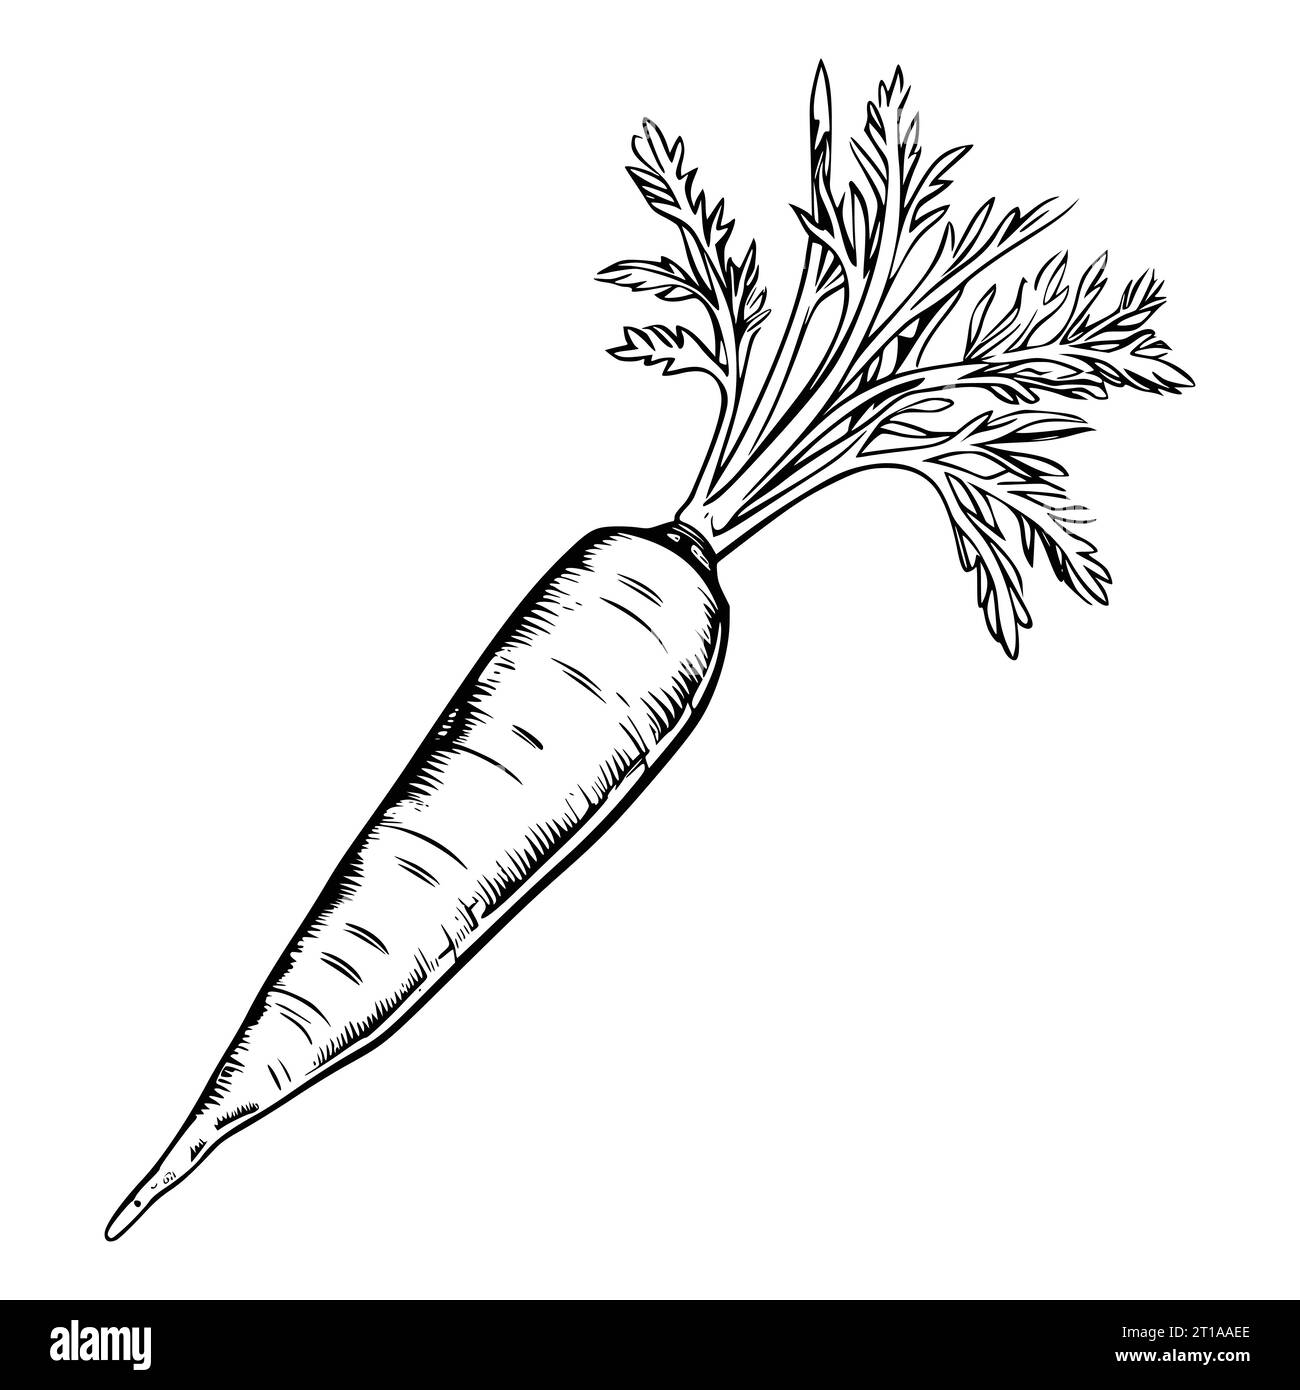 Carrot Coloring Page Drawing For Kids Stock Vector